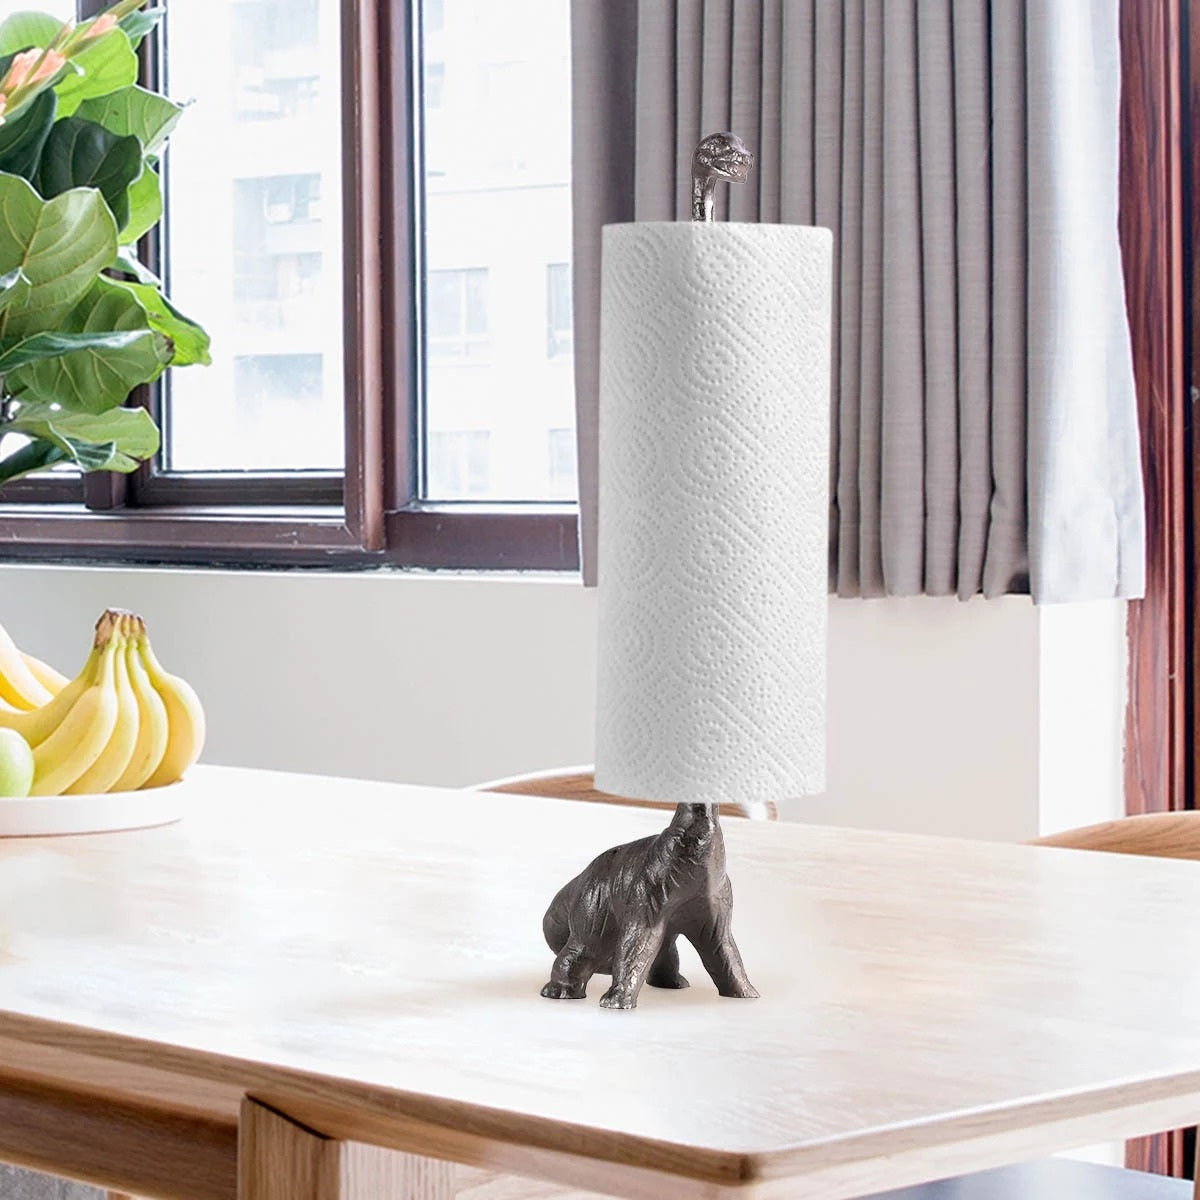 Paper Towel Holder with Dinosaur